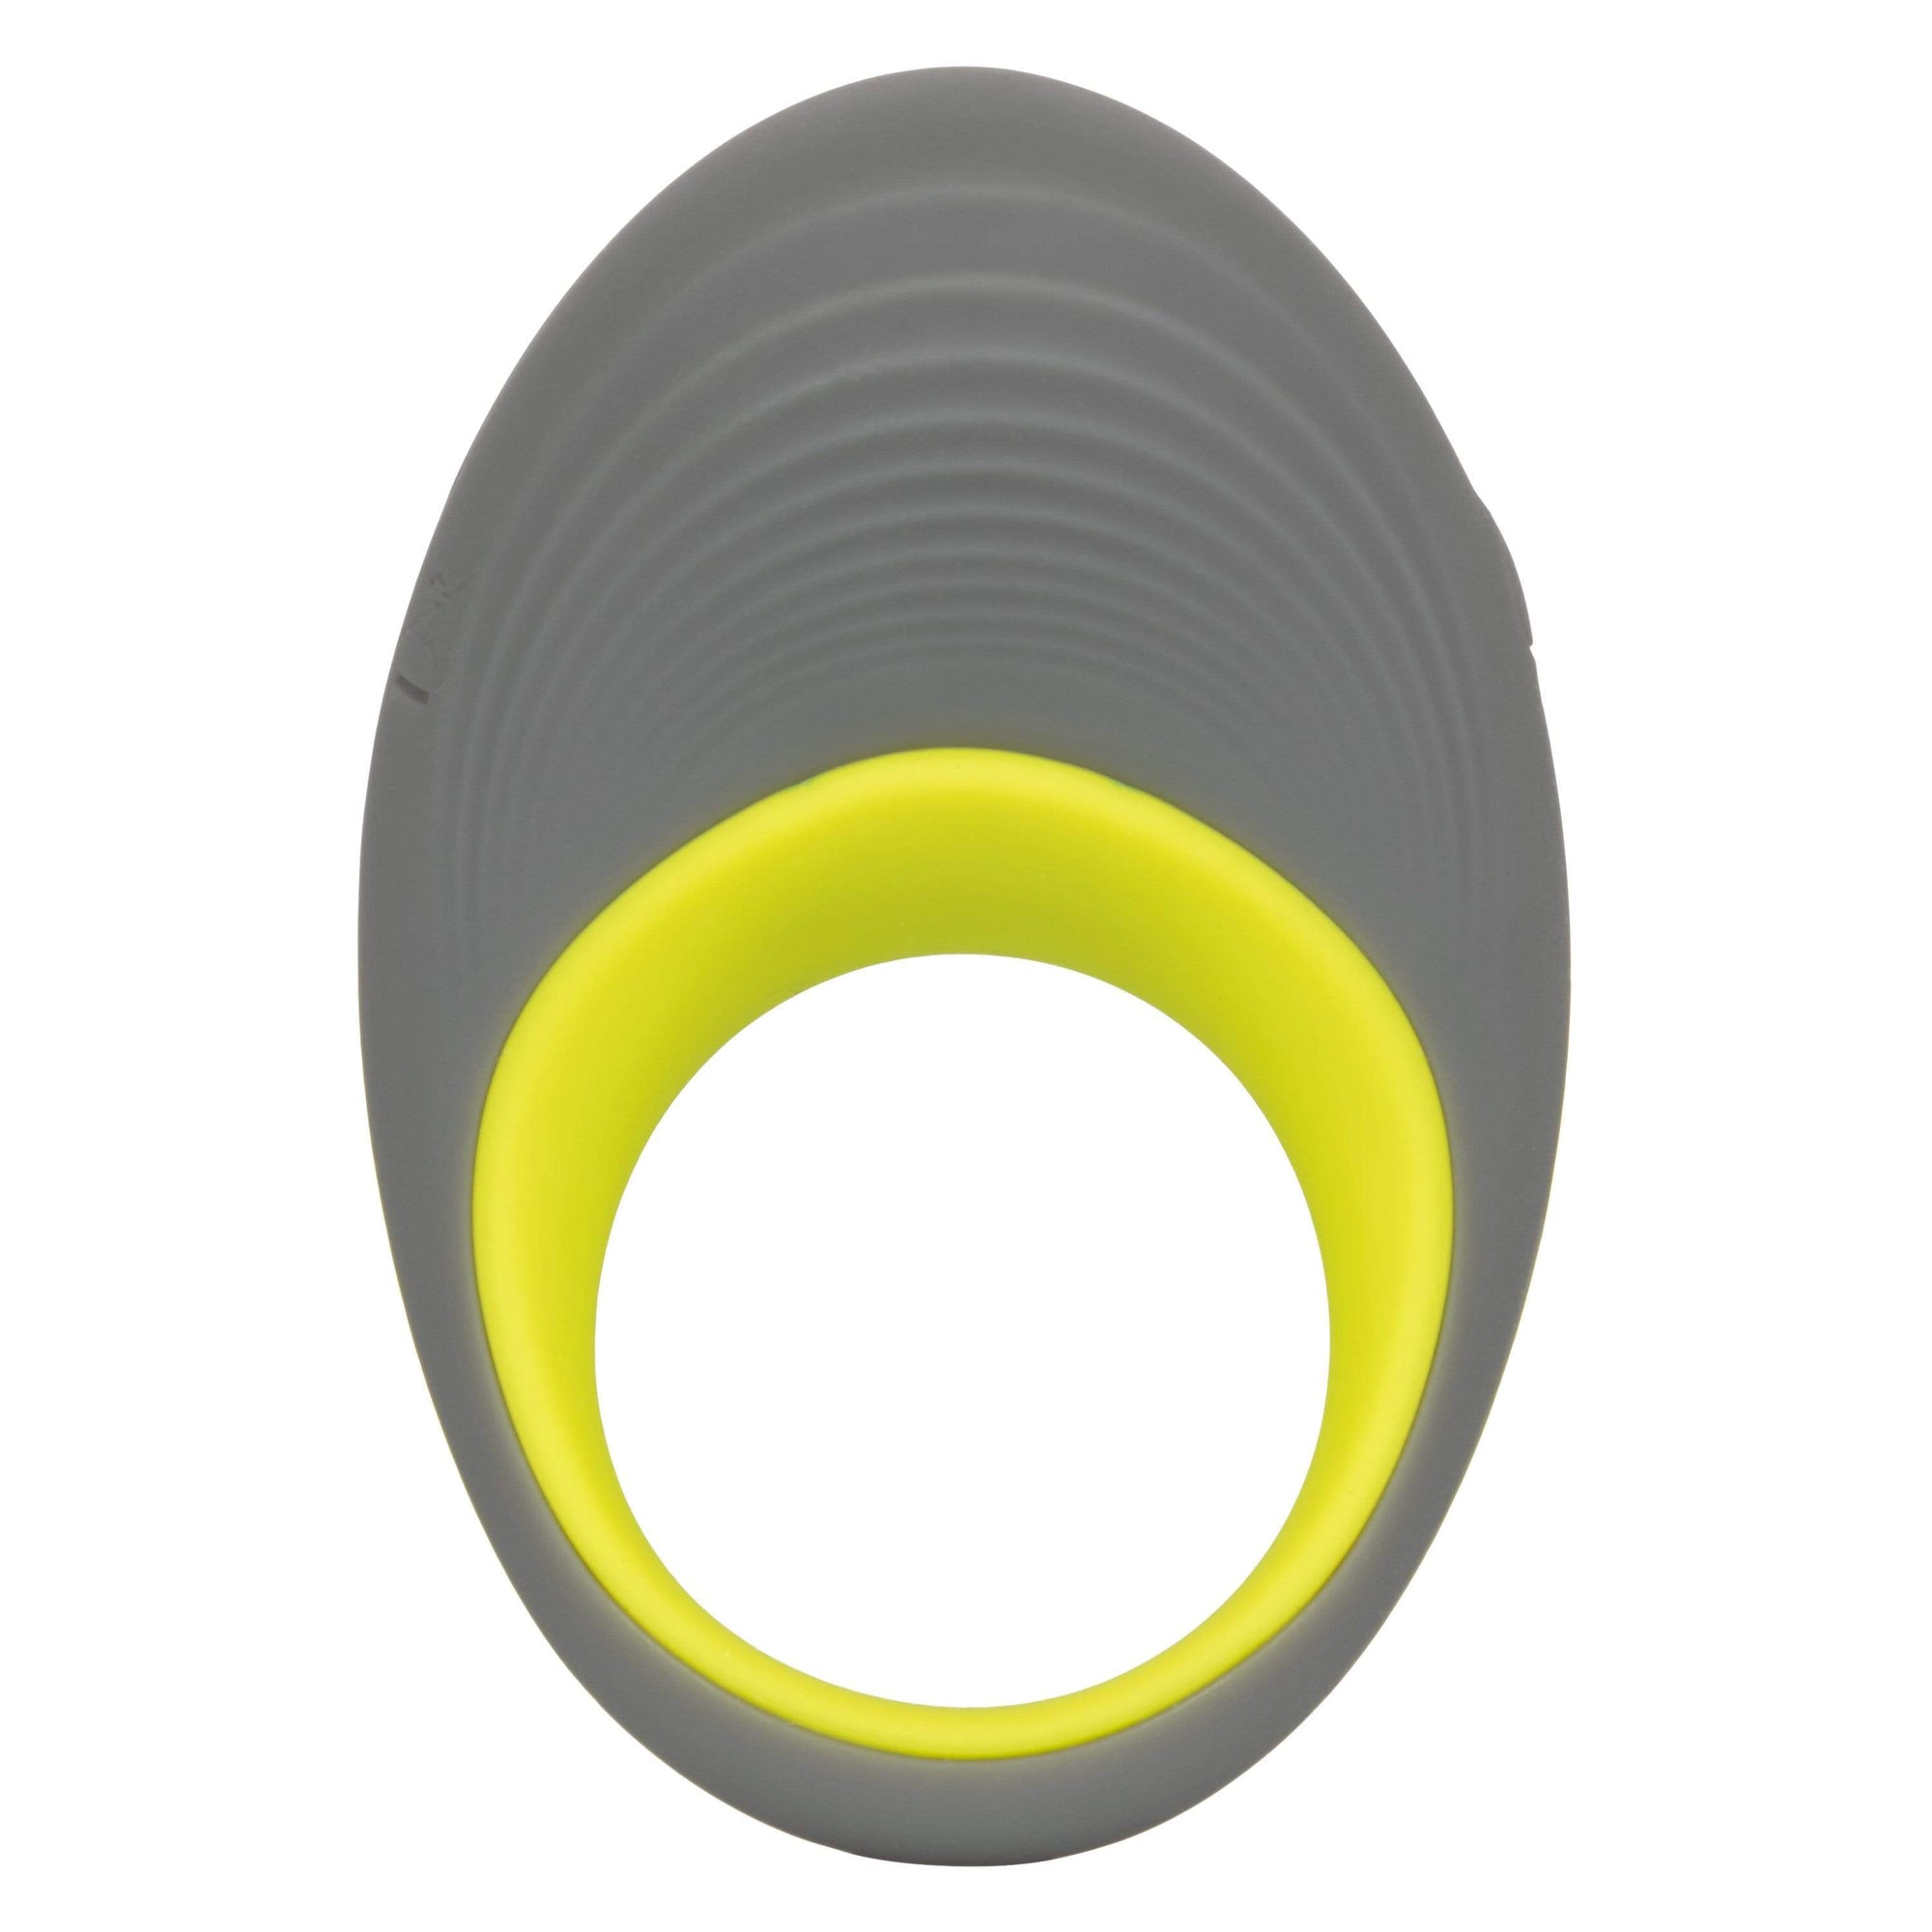 California Exotics - Link Up Edge Vibrating Cock Ring (Grey) Silicone Cock Ring (Vibration) Rechargeable 716770094728 CherryAffairs